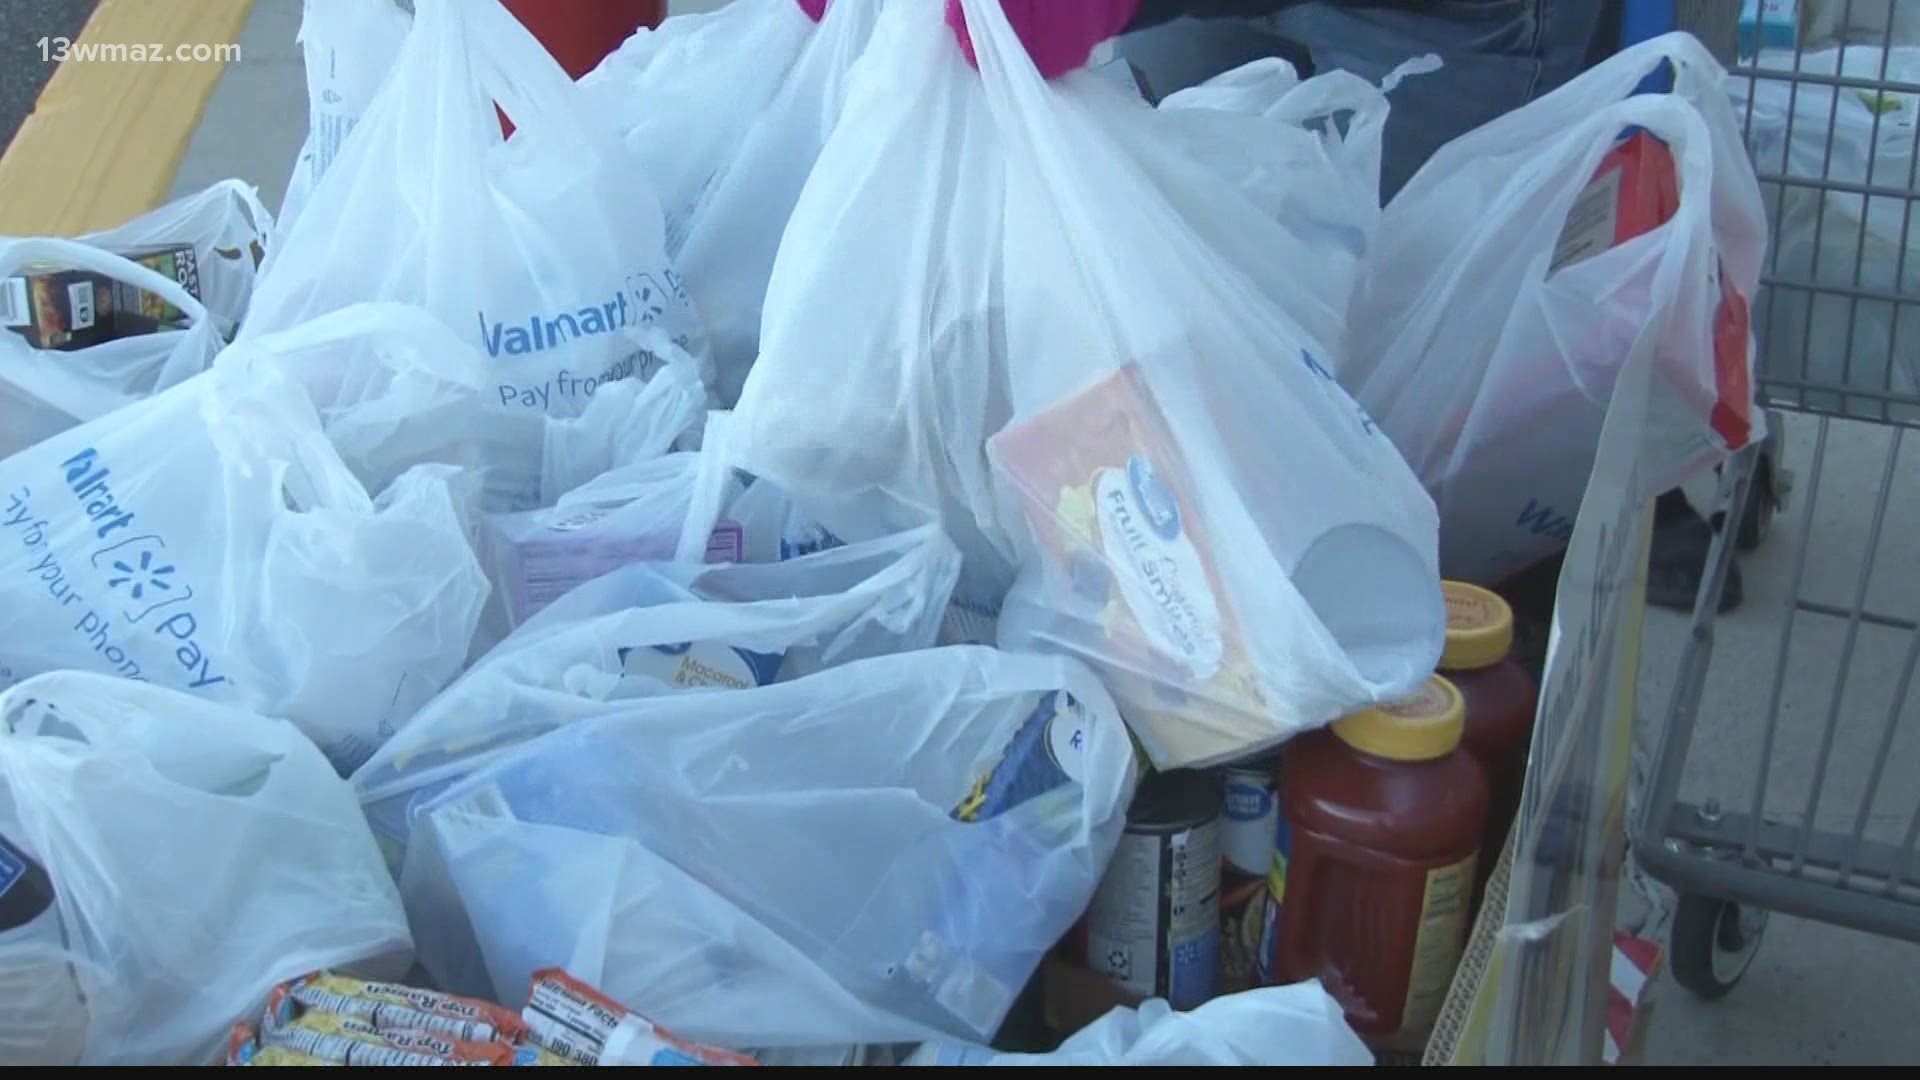 13WMAZ partnered with the Middle Georgia Community Food Bank to collect food and monetary donations to help families through the holidays.